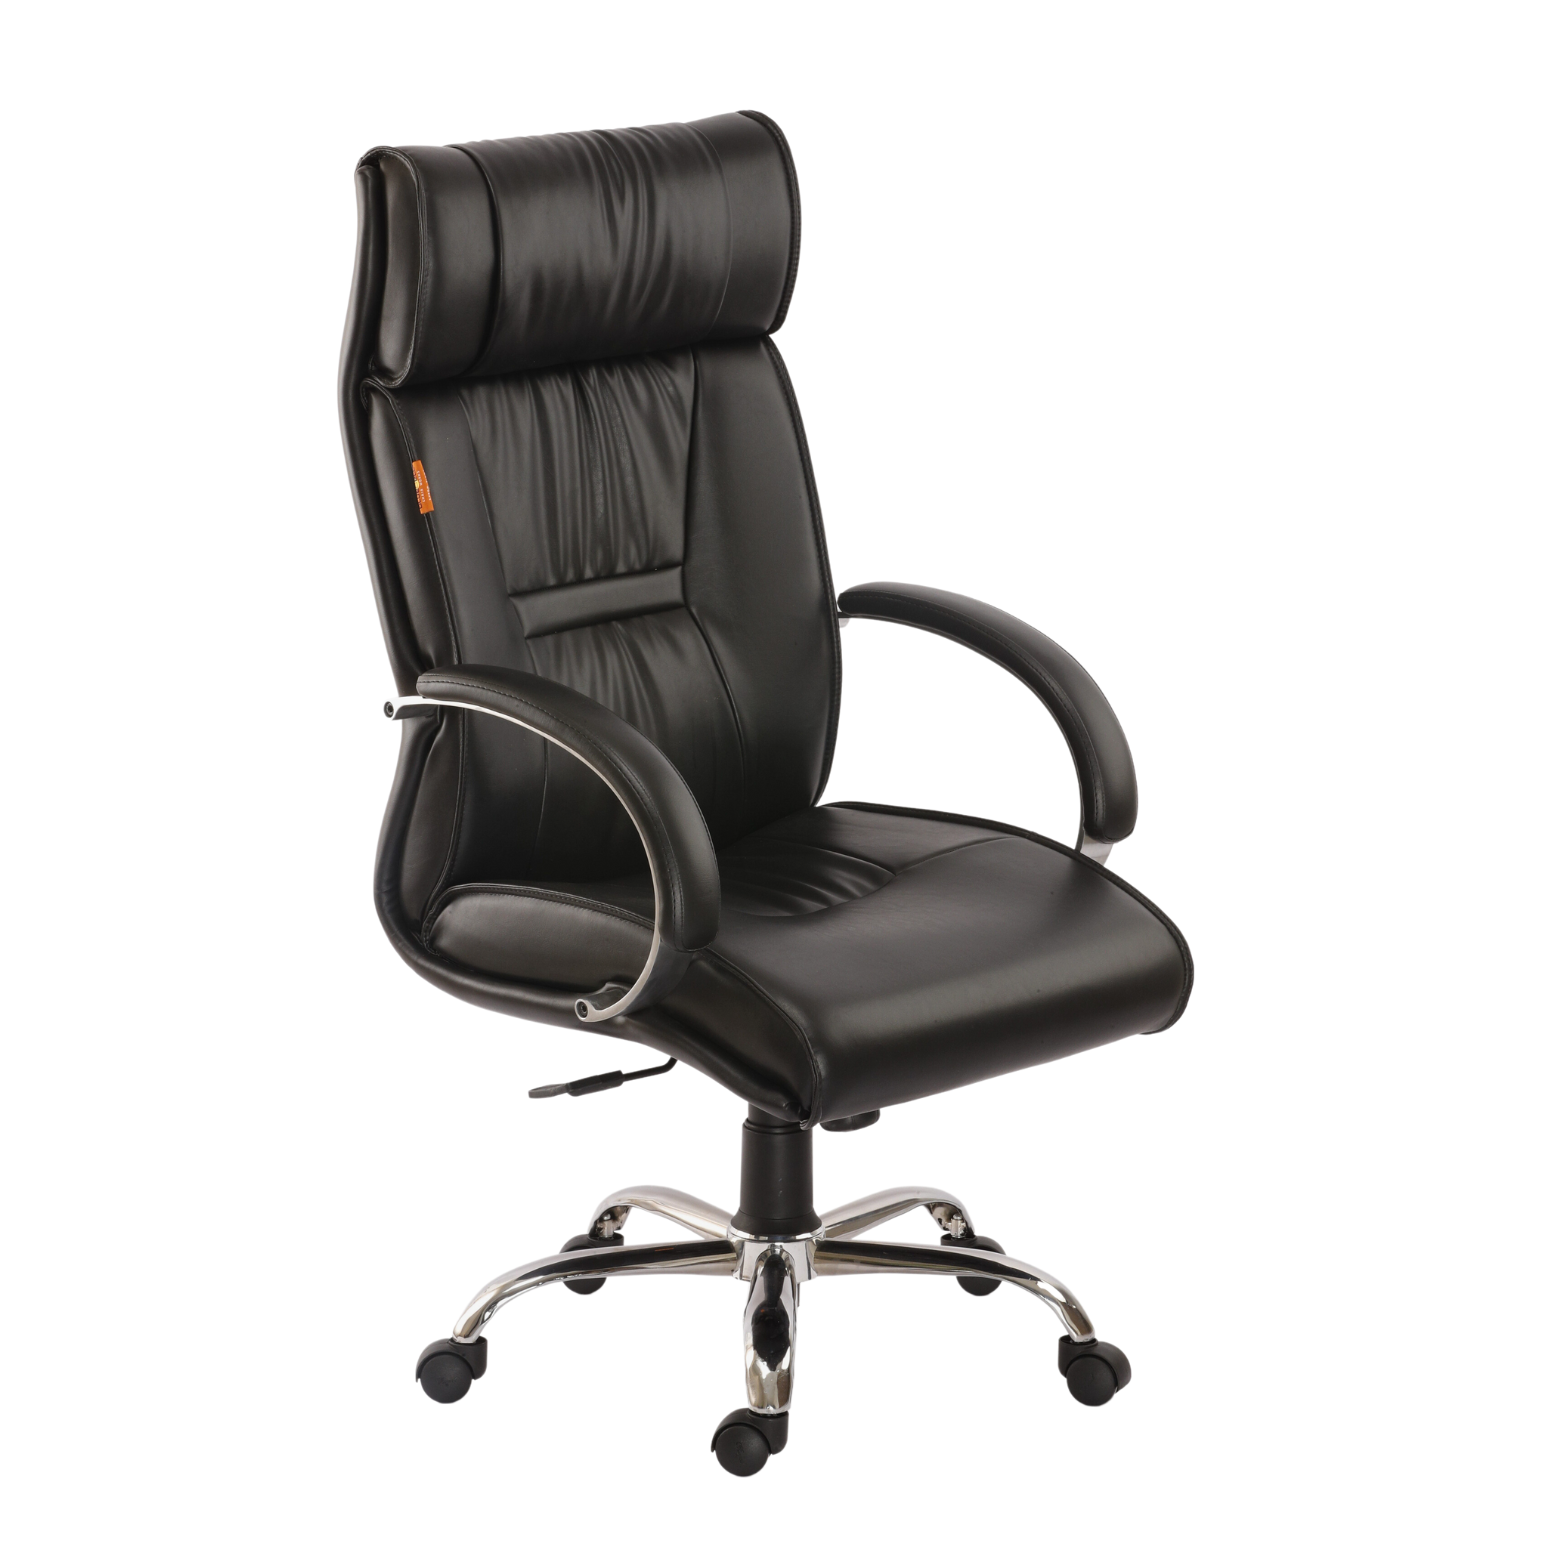 Executive Chair - Premium Rich Leatherite with Ergonomic Design and 360 Degree Swivel Function.